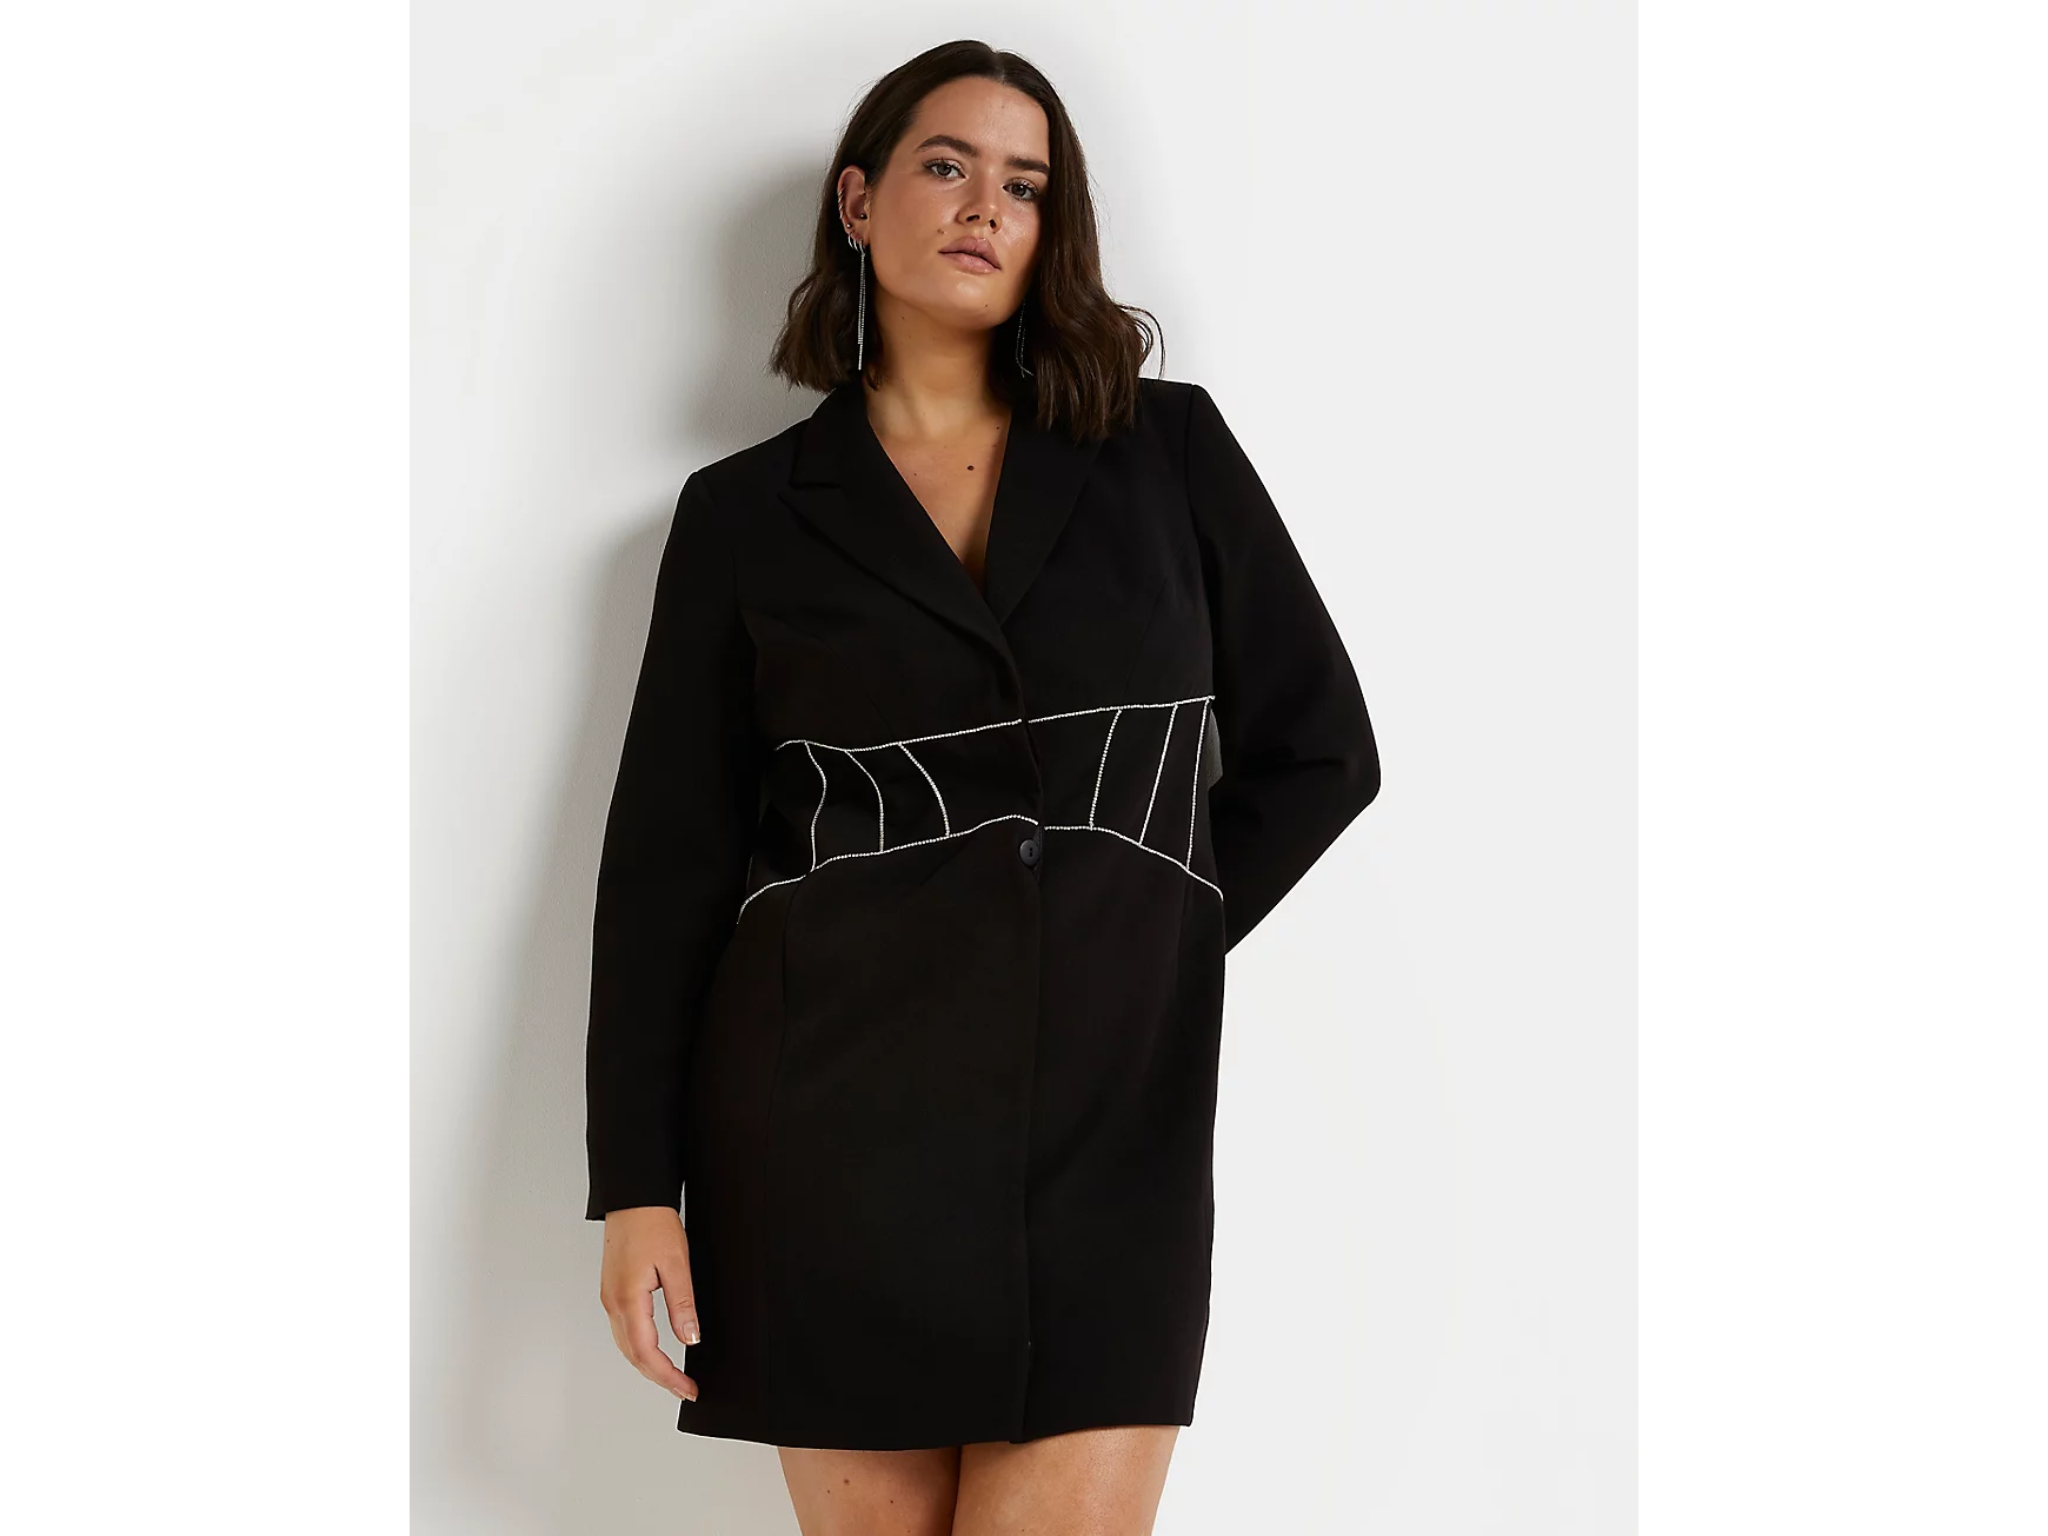 river-island-blazer-dress-nye-outfits-indybest.png